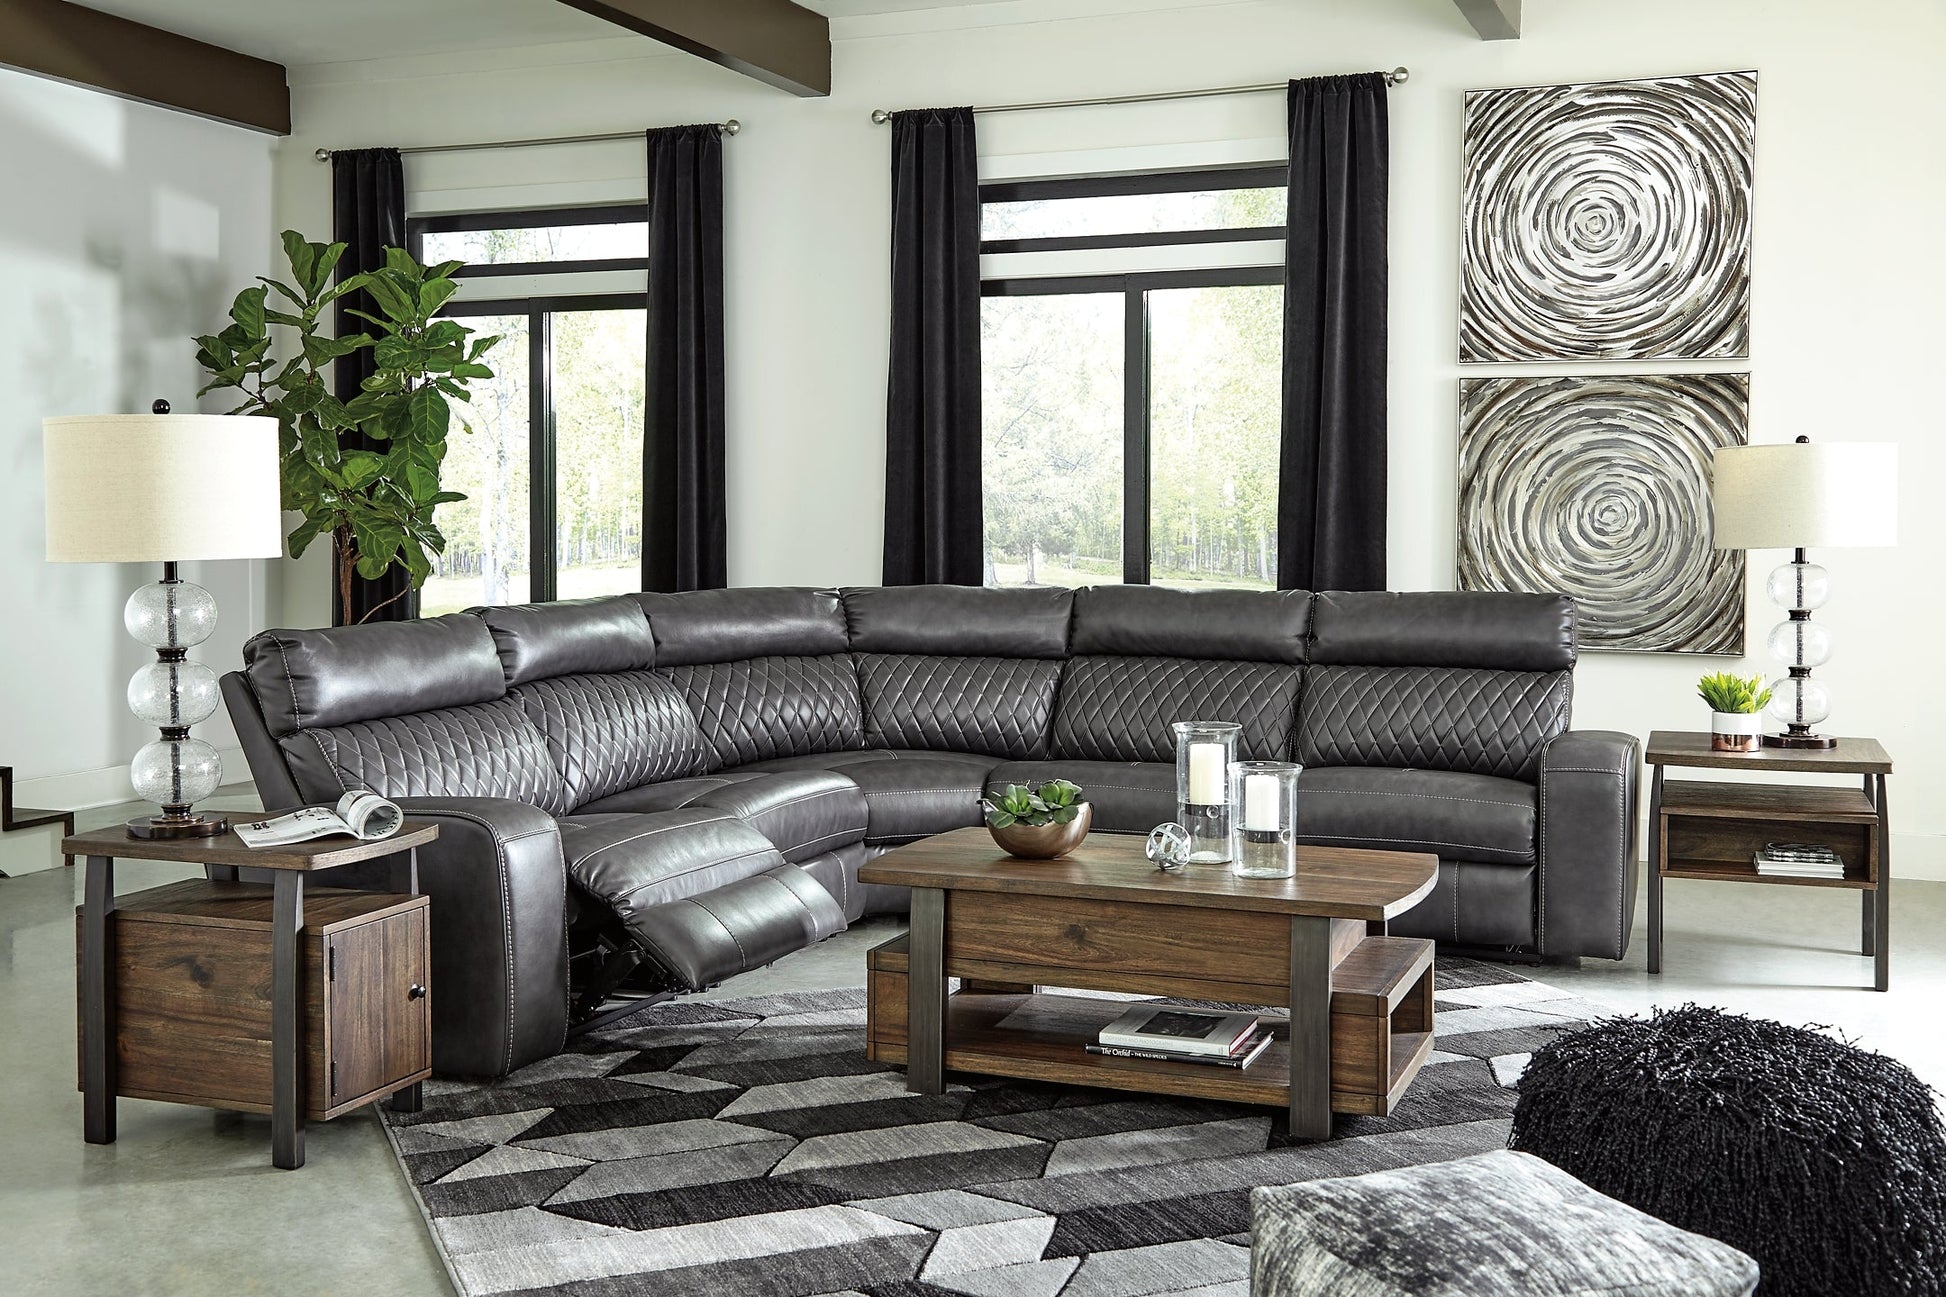 Samperstone 5-Piece Power Reclining Sectional Smyrna Furniture Outlet